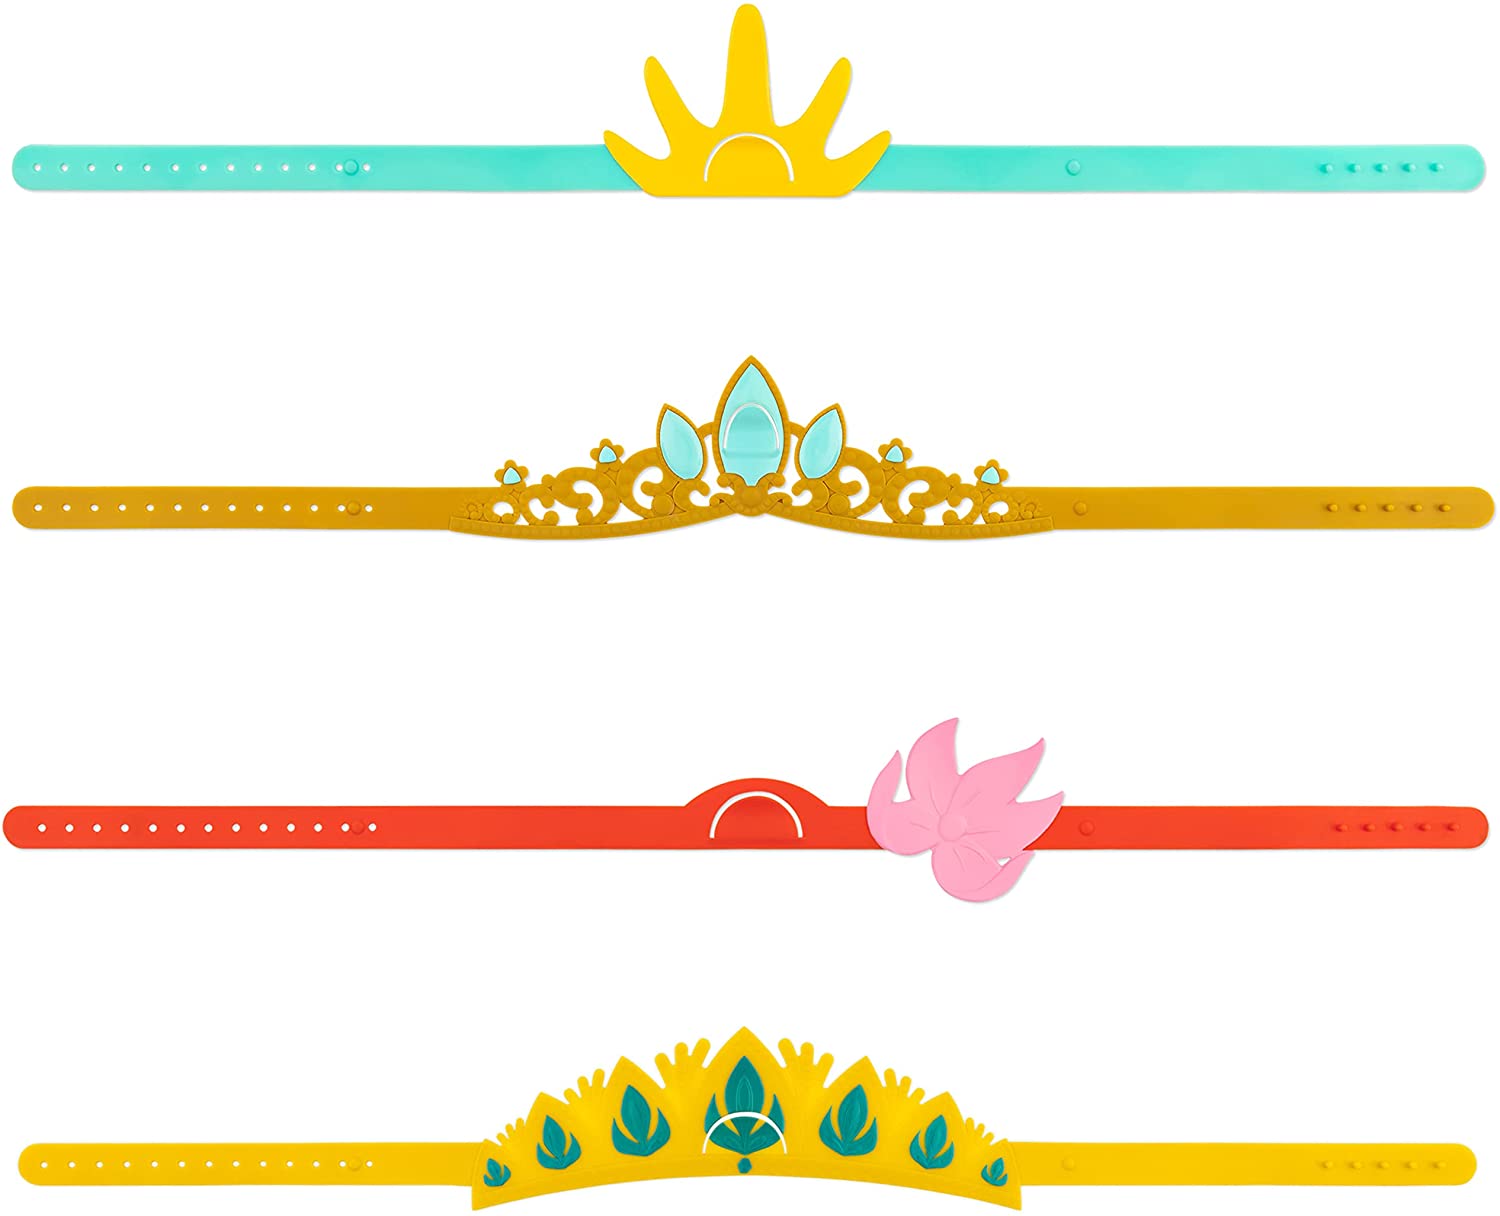 Hedbanz Disney Princess Game with Hedbanz Frozen Game 2-Pack Bundle Guessing Board Game